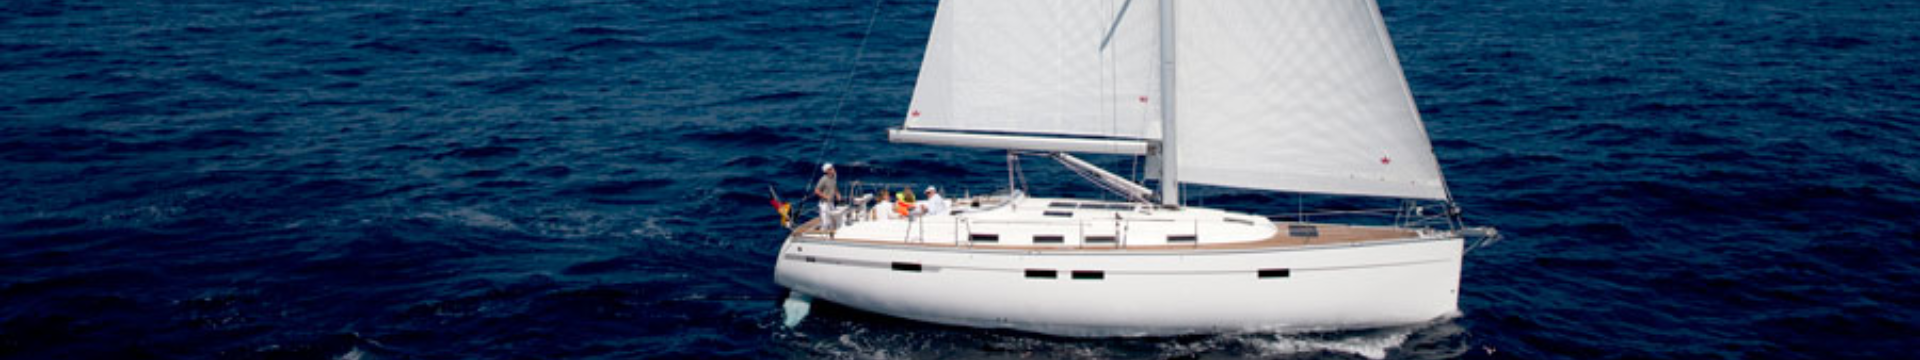 Bavaria Cruiser 45 Provence Main picture for the desktop